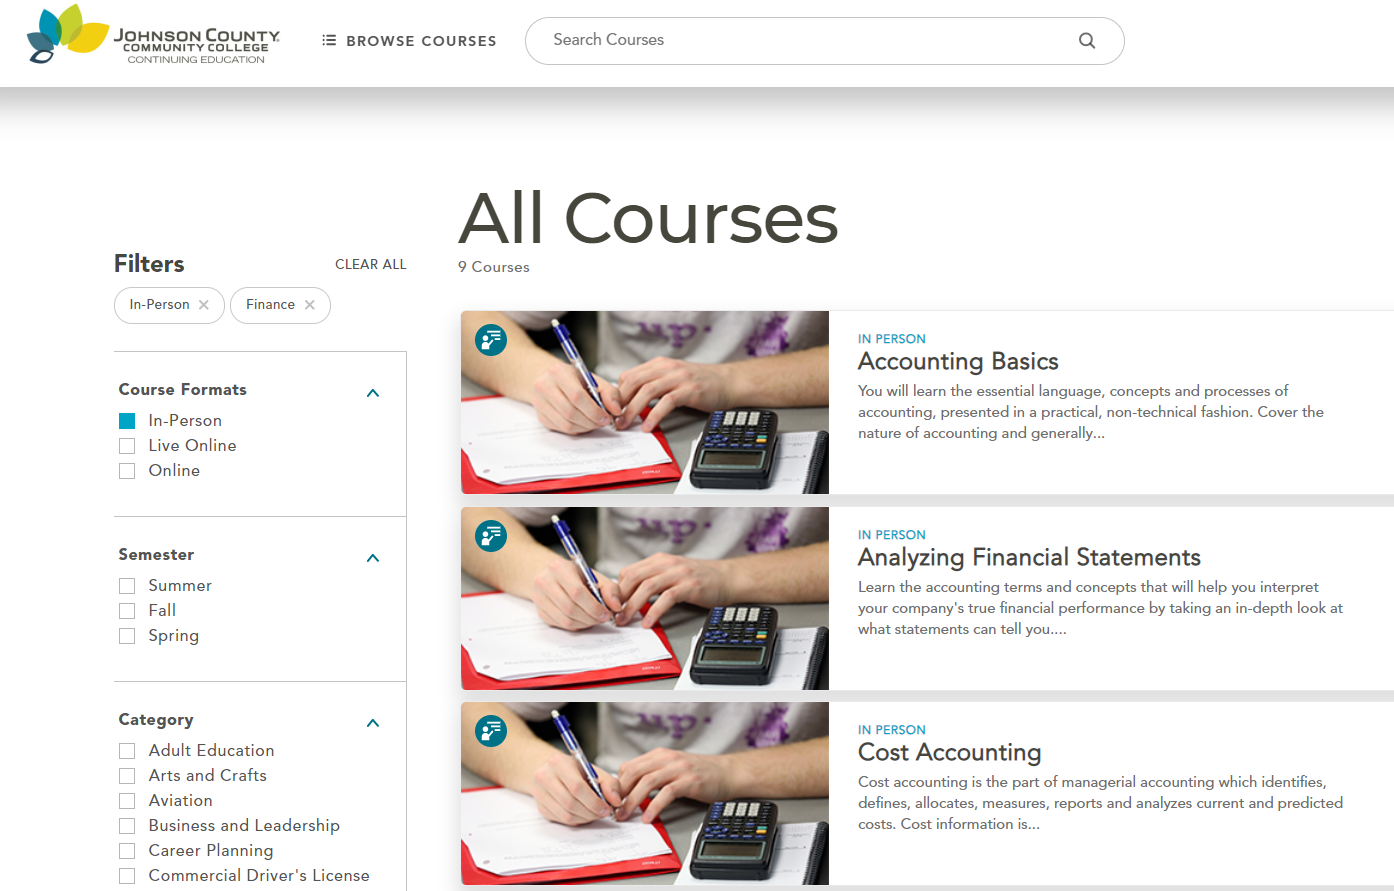 Screenshot of All Courses List on JCCC Webpage